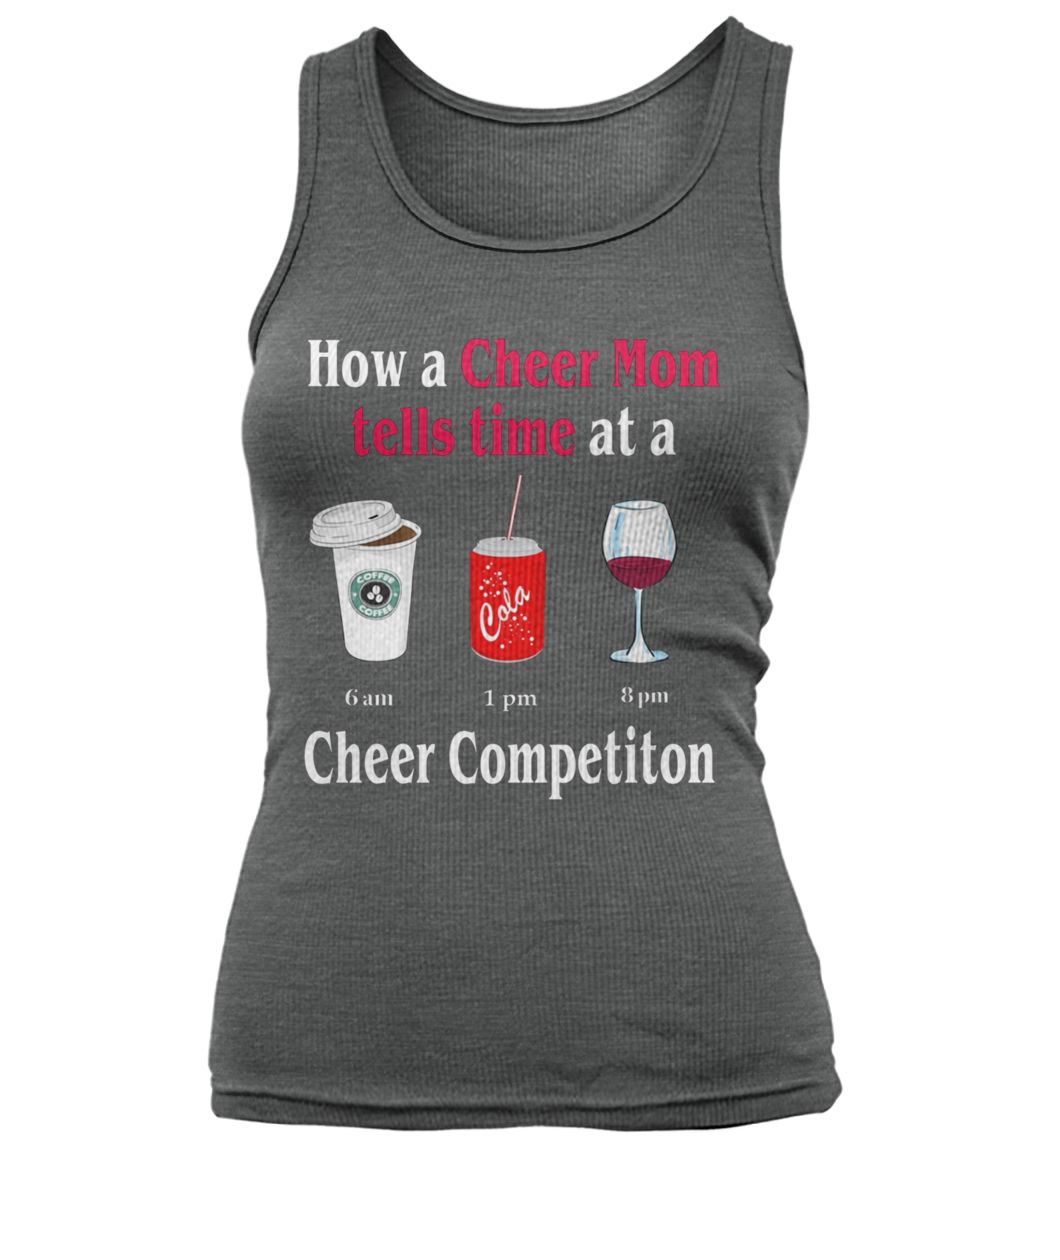 How a cheer mom tells time at a cheer competition women's tank top